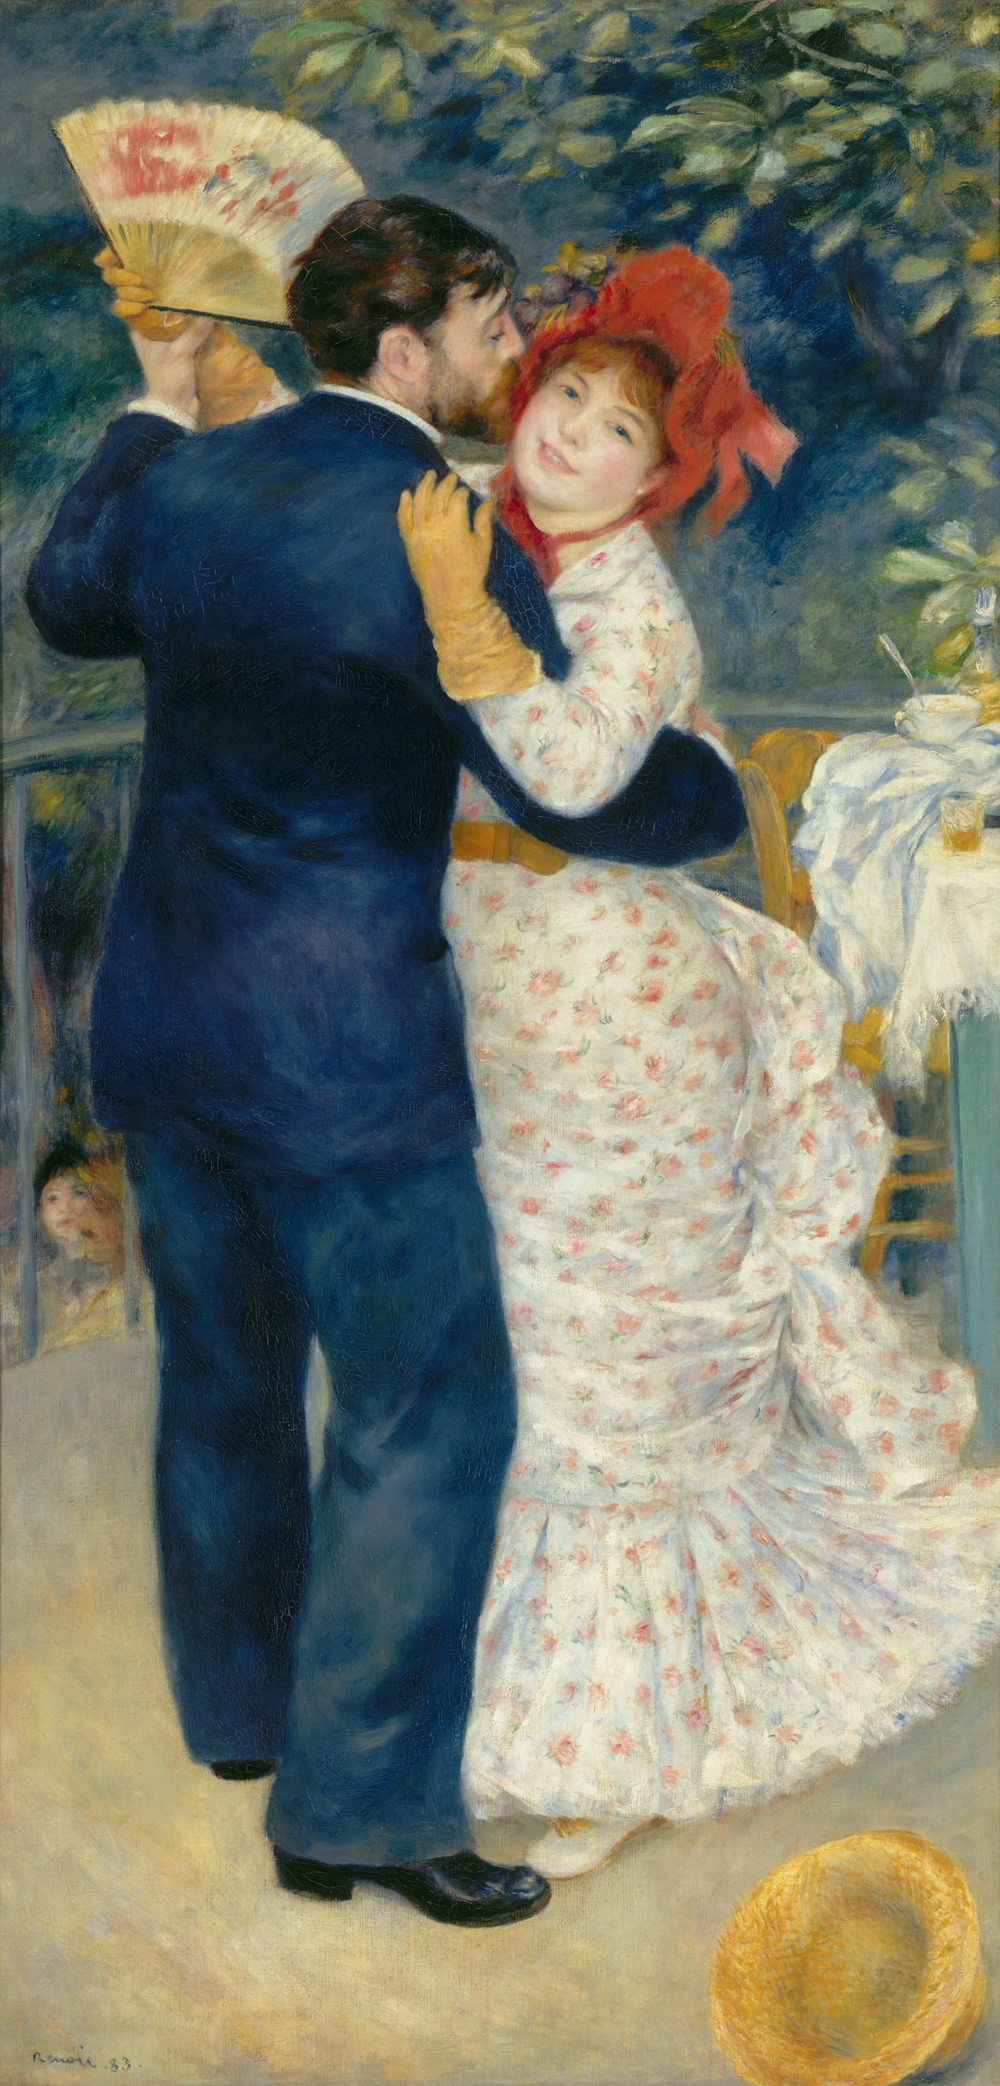 Viewing Renoir: A Different Kind of Challenge